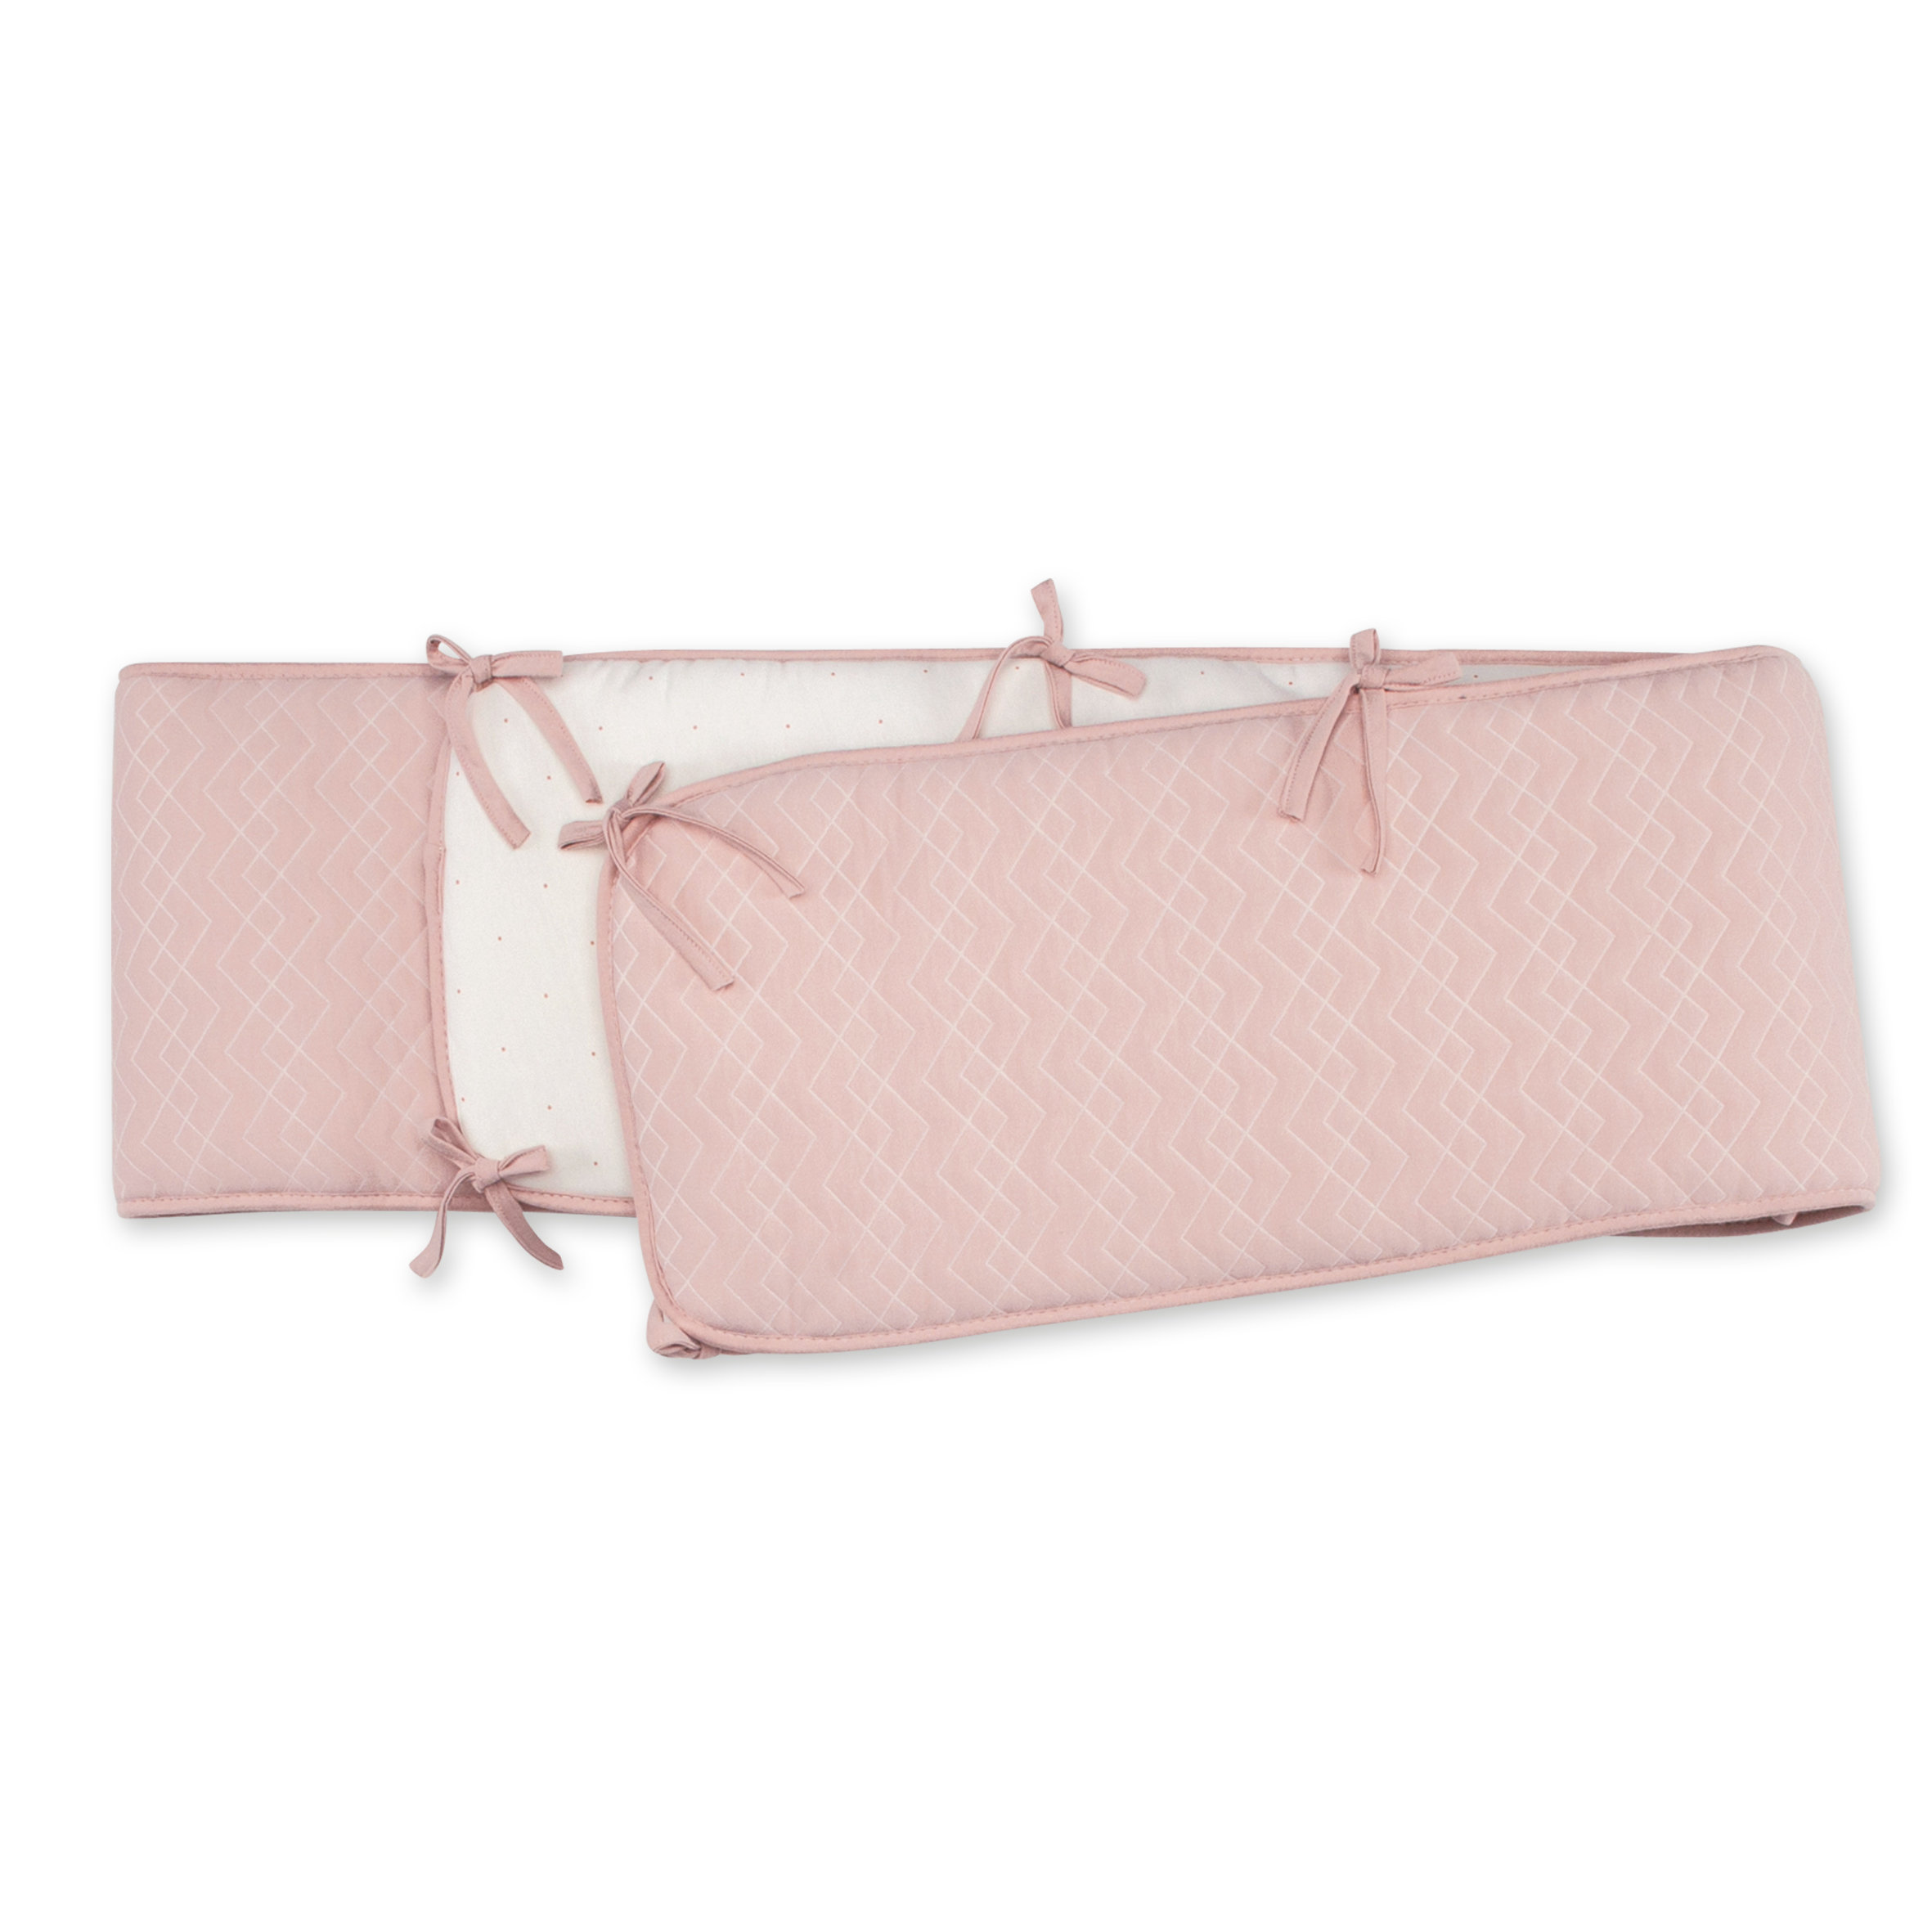 Playpen bumper Pady quilted jersey + jersey 100x100x28cm OSAKA Old pink